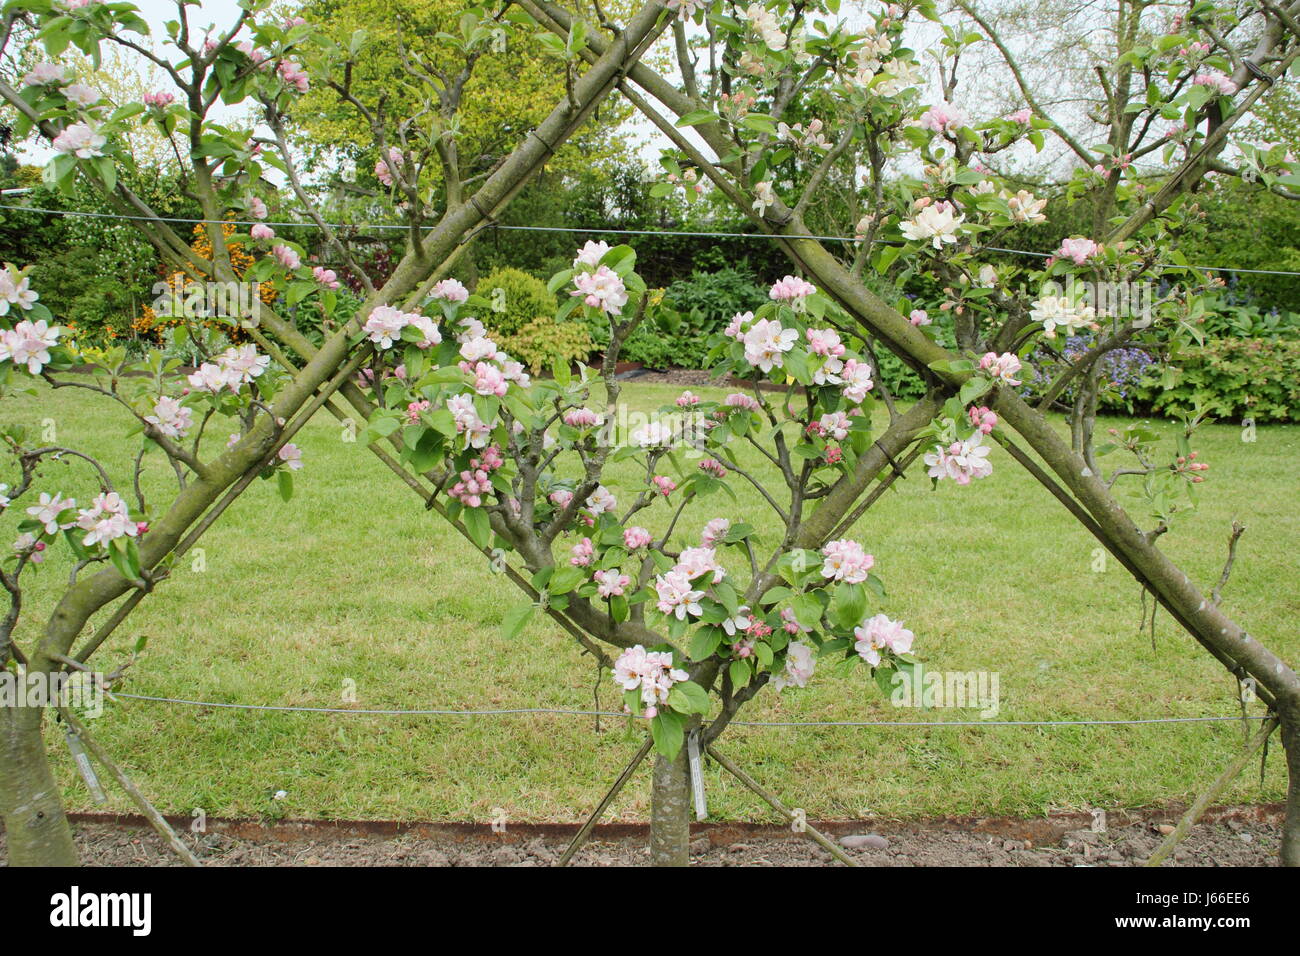 Blossom on apple trees (malus) trained into the 'Belgian Fence' espalier  forming diamond patterns, in the orchard of an English garden Stock Photo